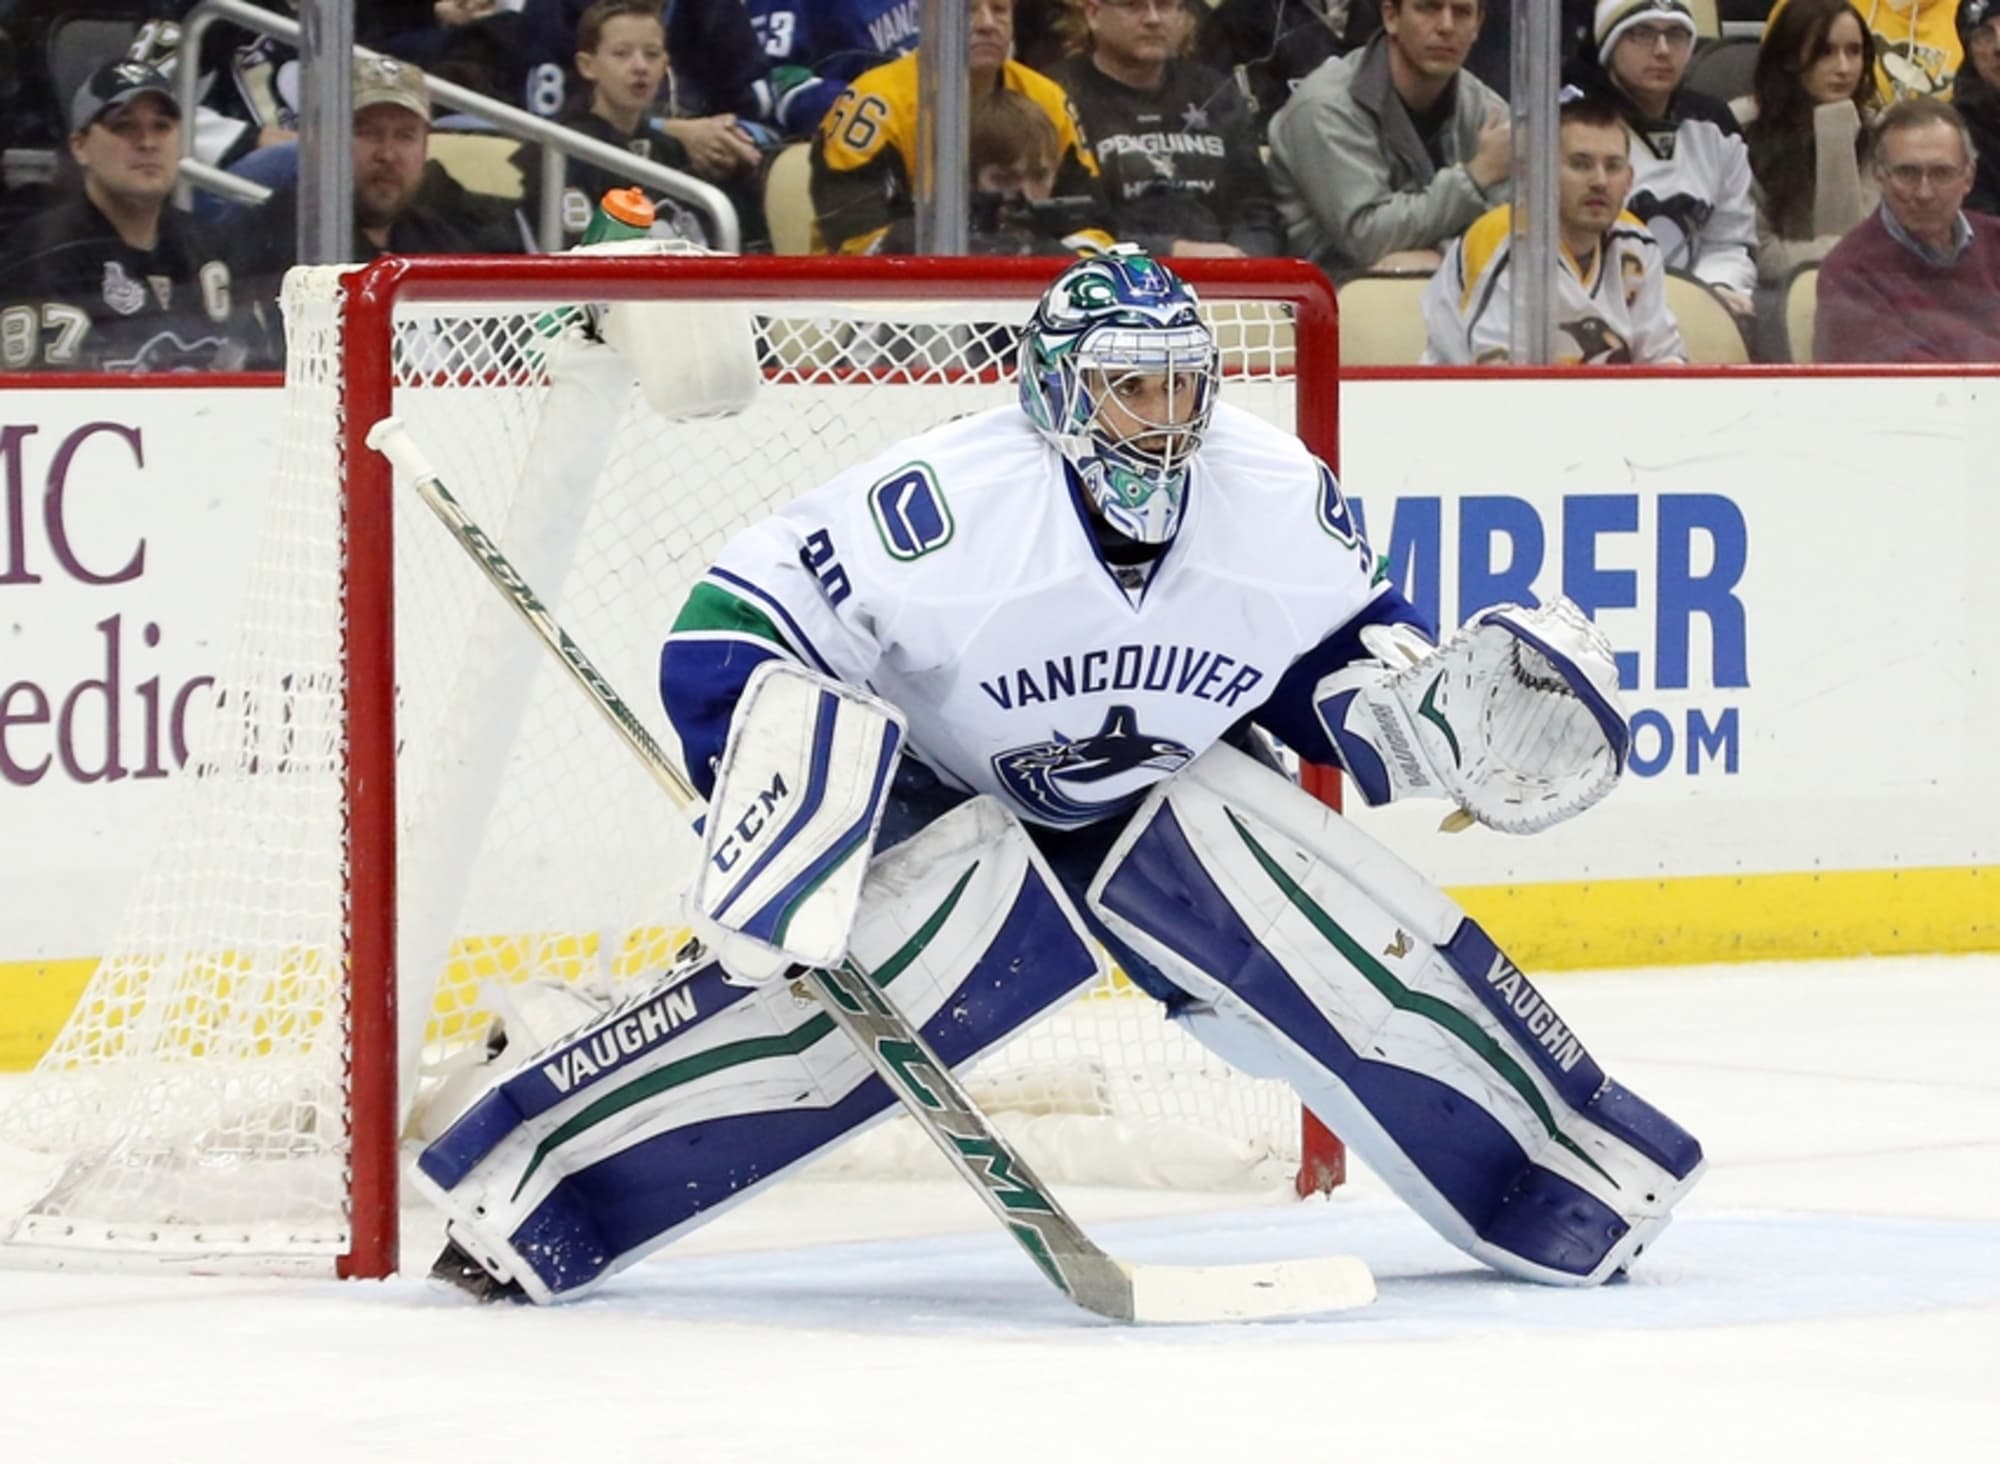 Vancouver Canucks-Calgary Flames: 5 facts about goalie Ryan Miller